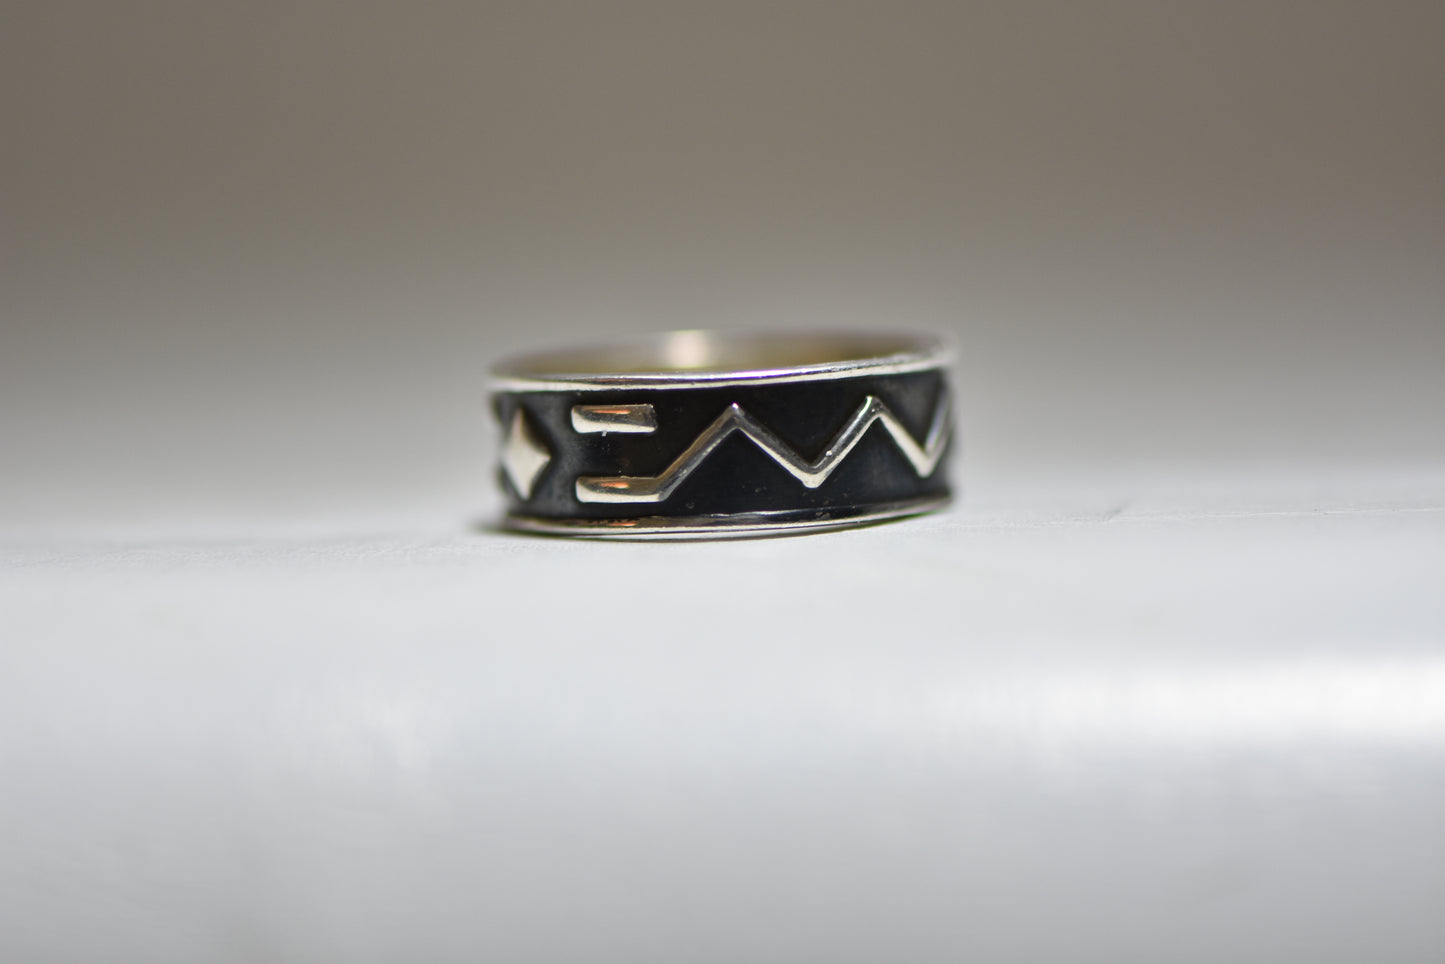 Mountains Ring Sun thumb Band sterling silver men women Size 9.50